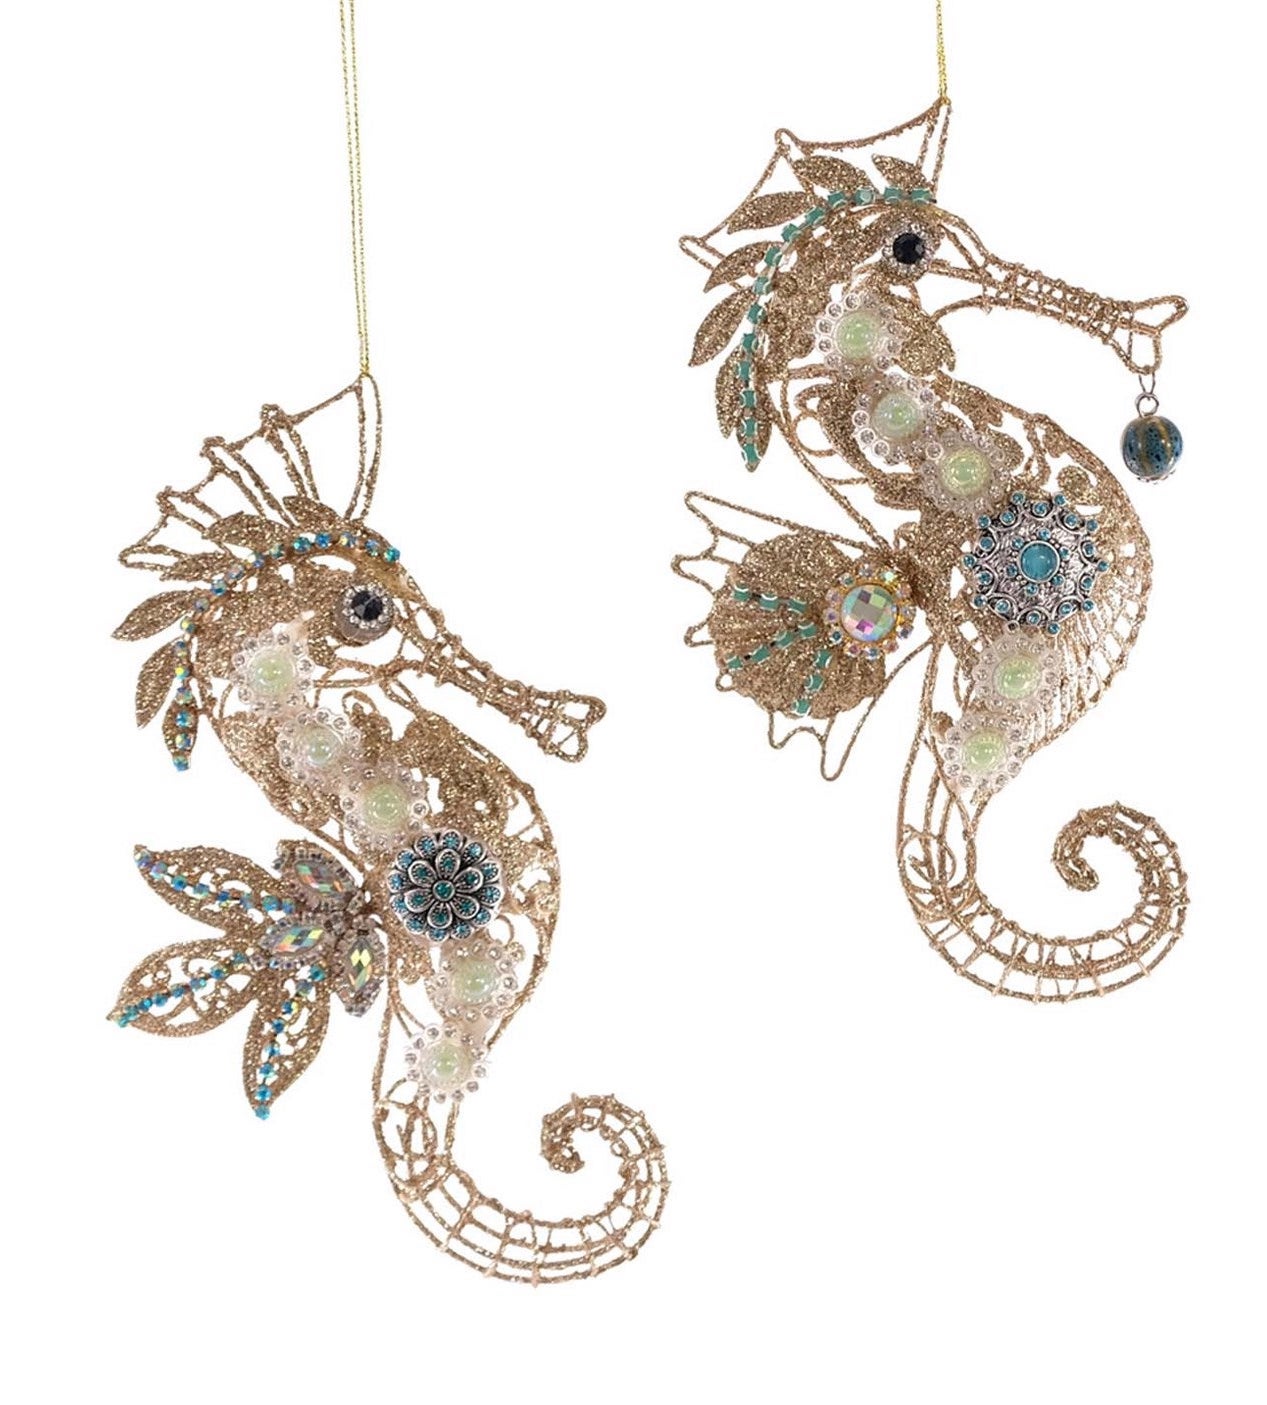 Jeweled Seahorse Ornaments by Katherine's Collection